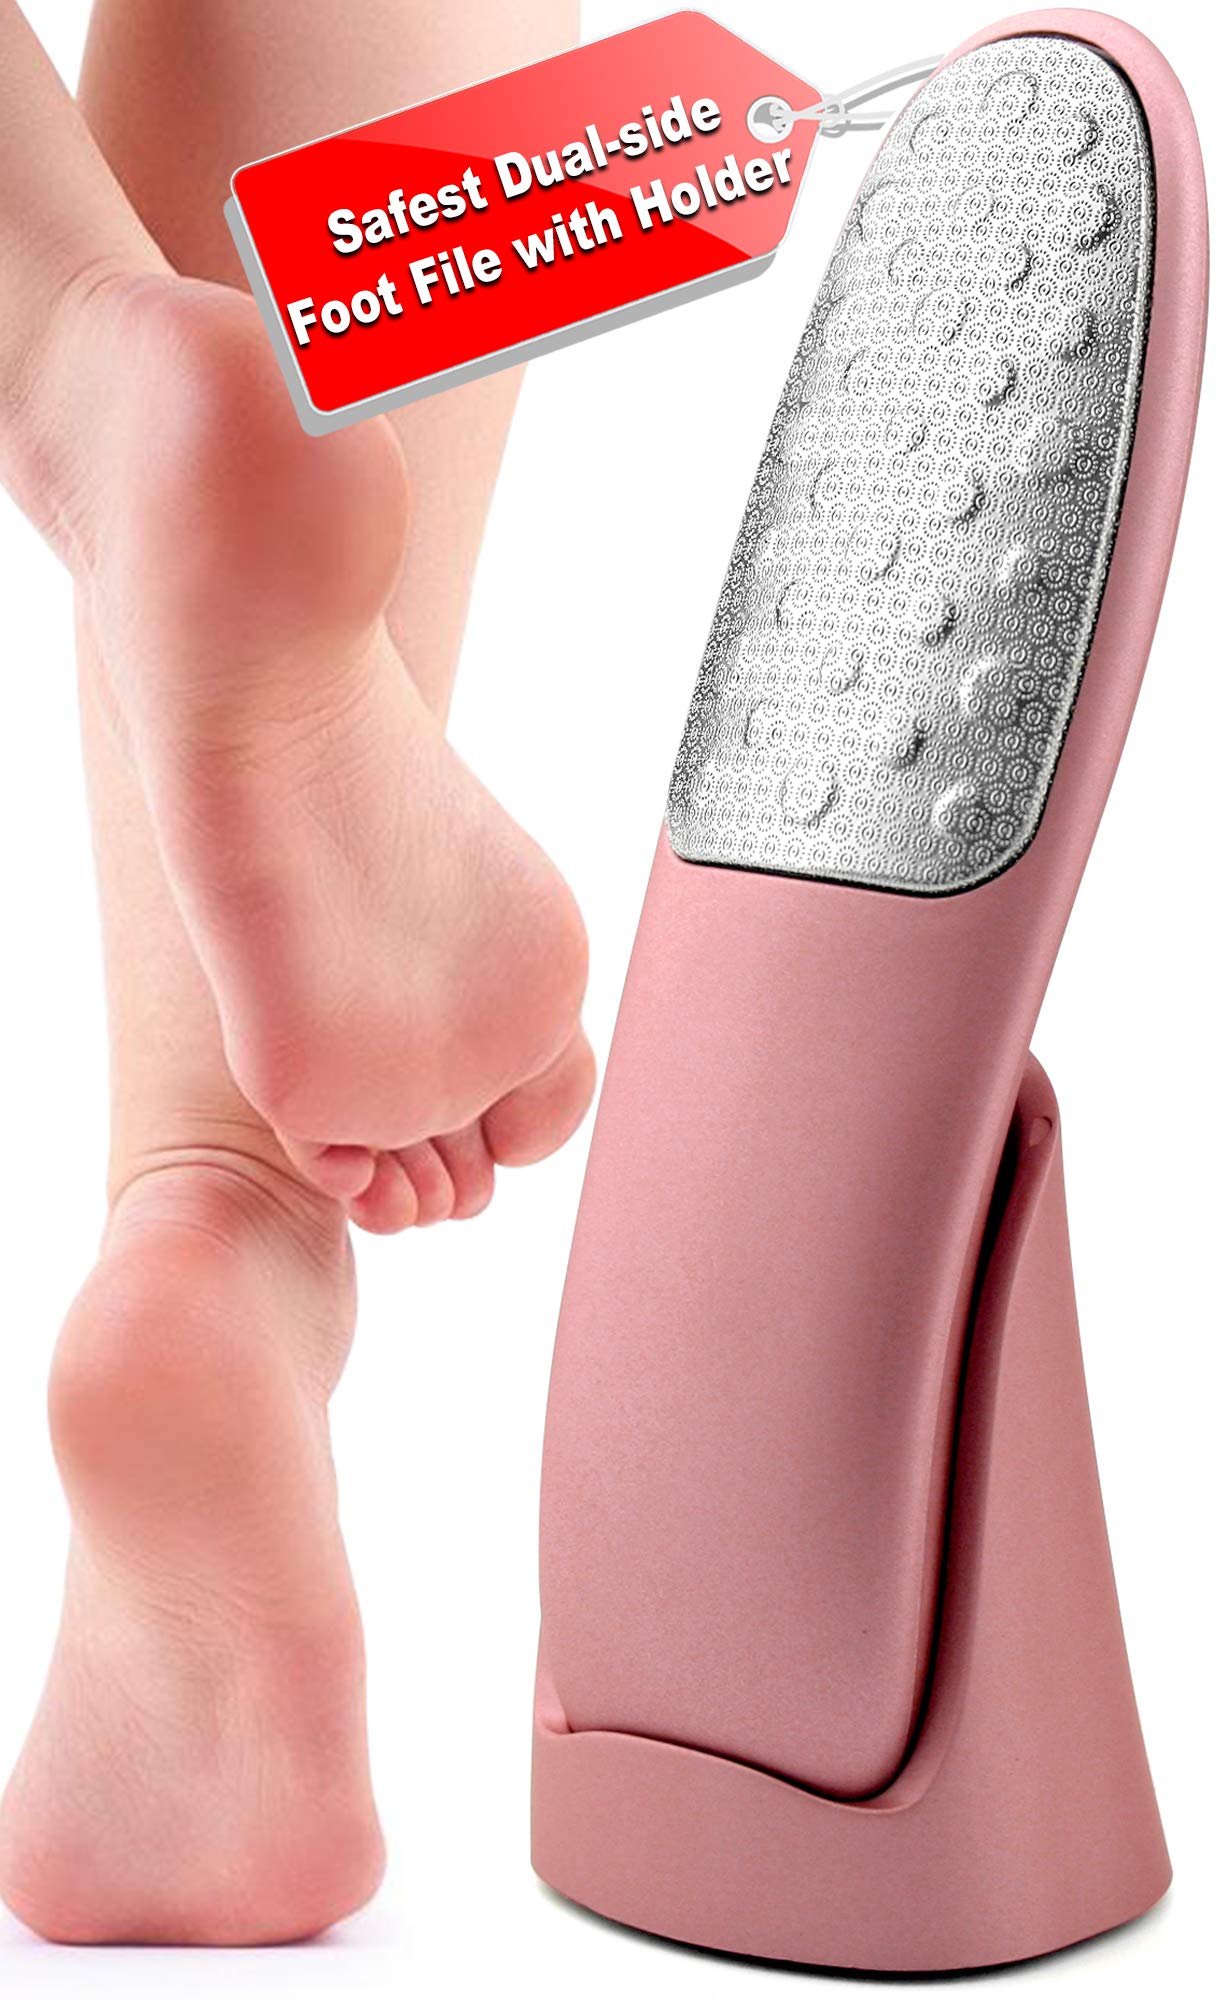 Foot Rasp Foot File And Callus Remover, Best Foot Care Pedicure